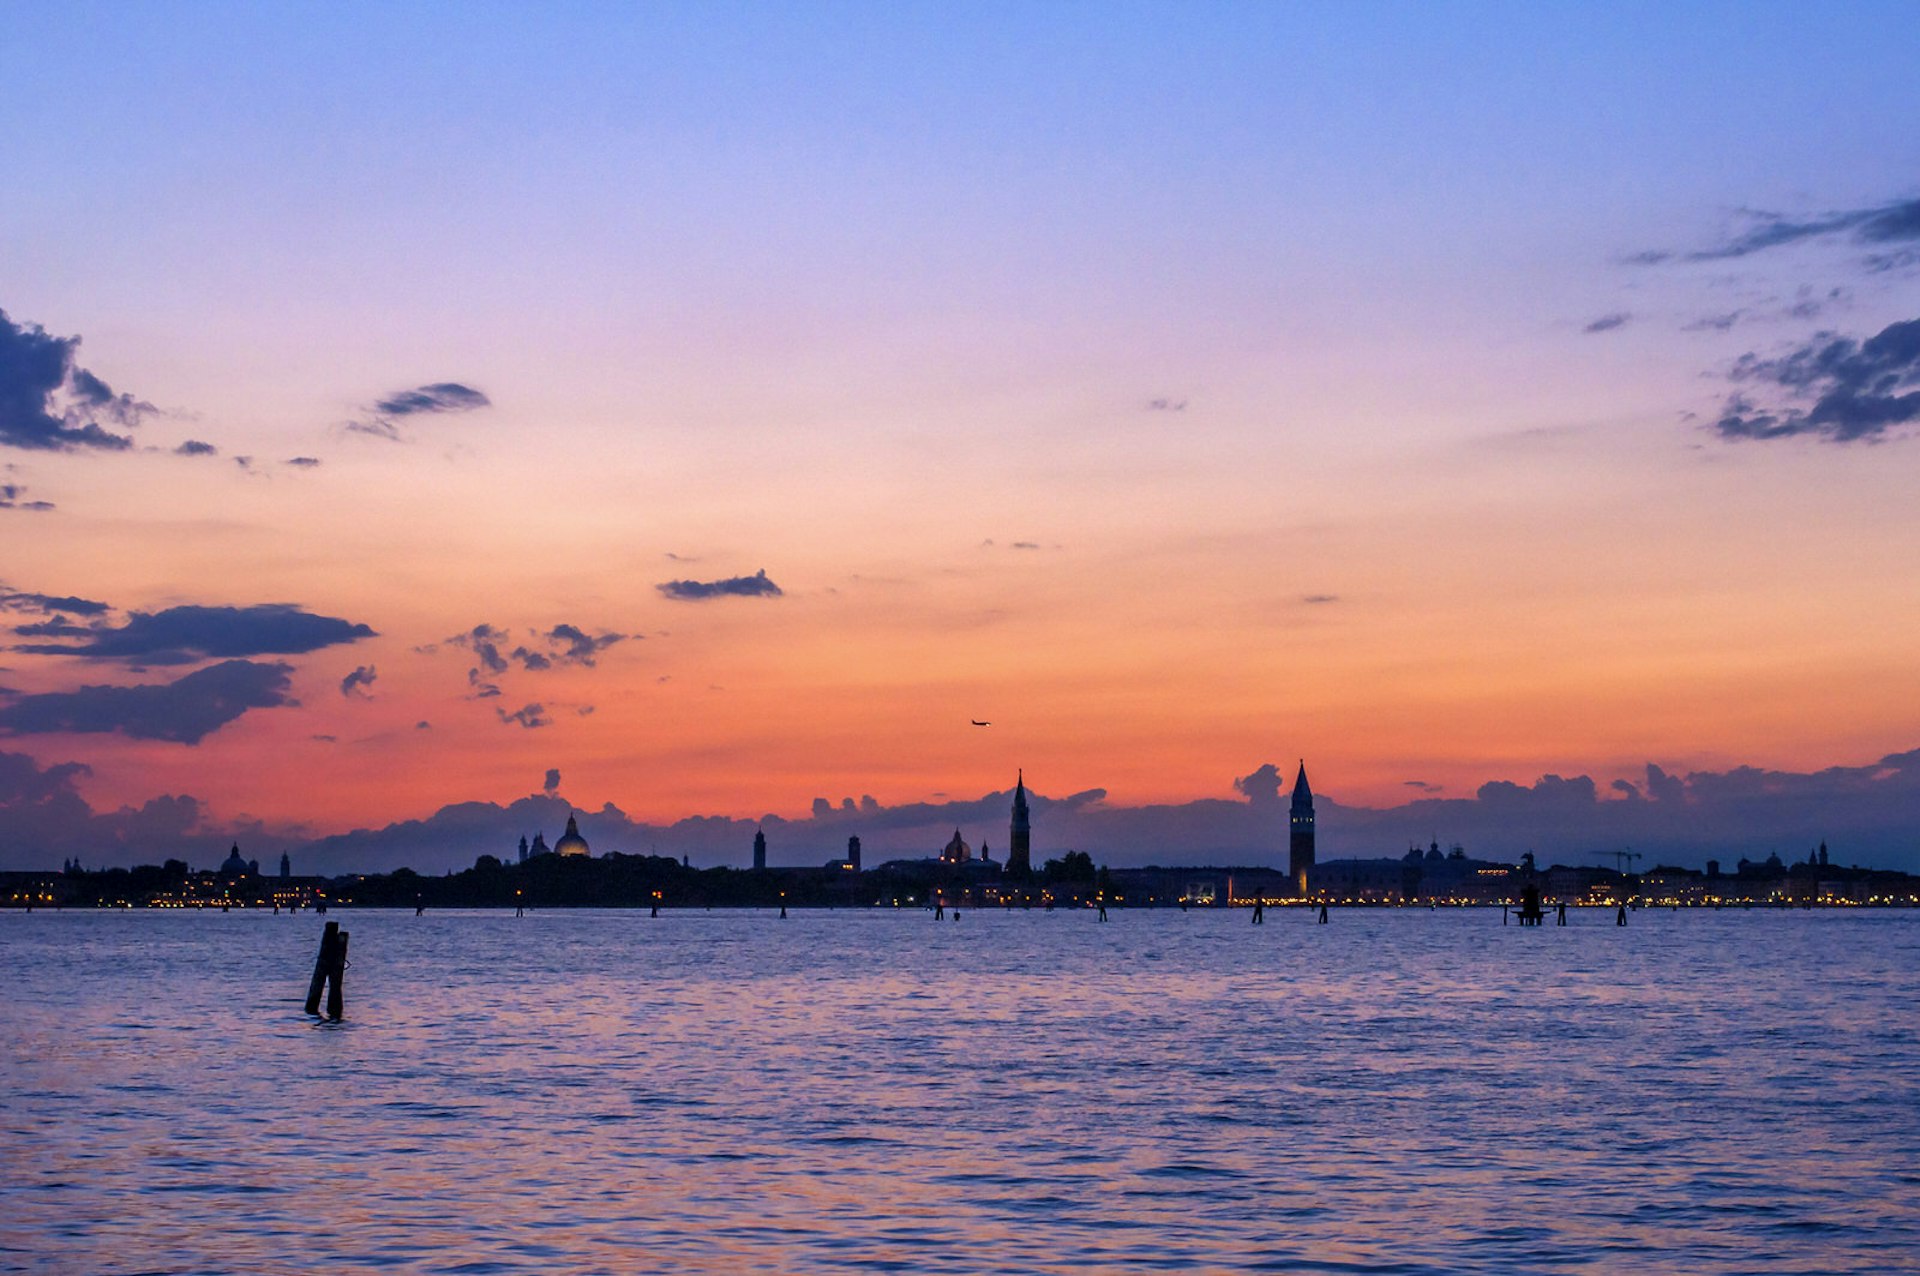 Sunset over Venice seen from the Lido